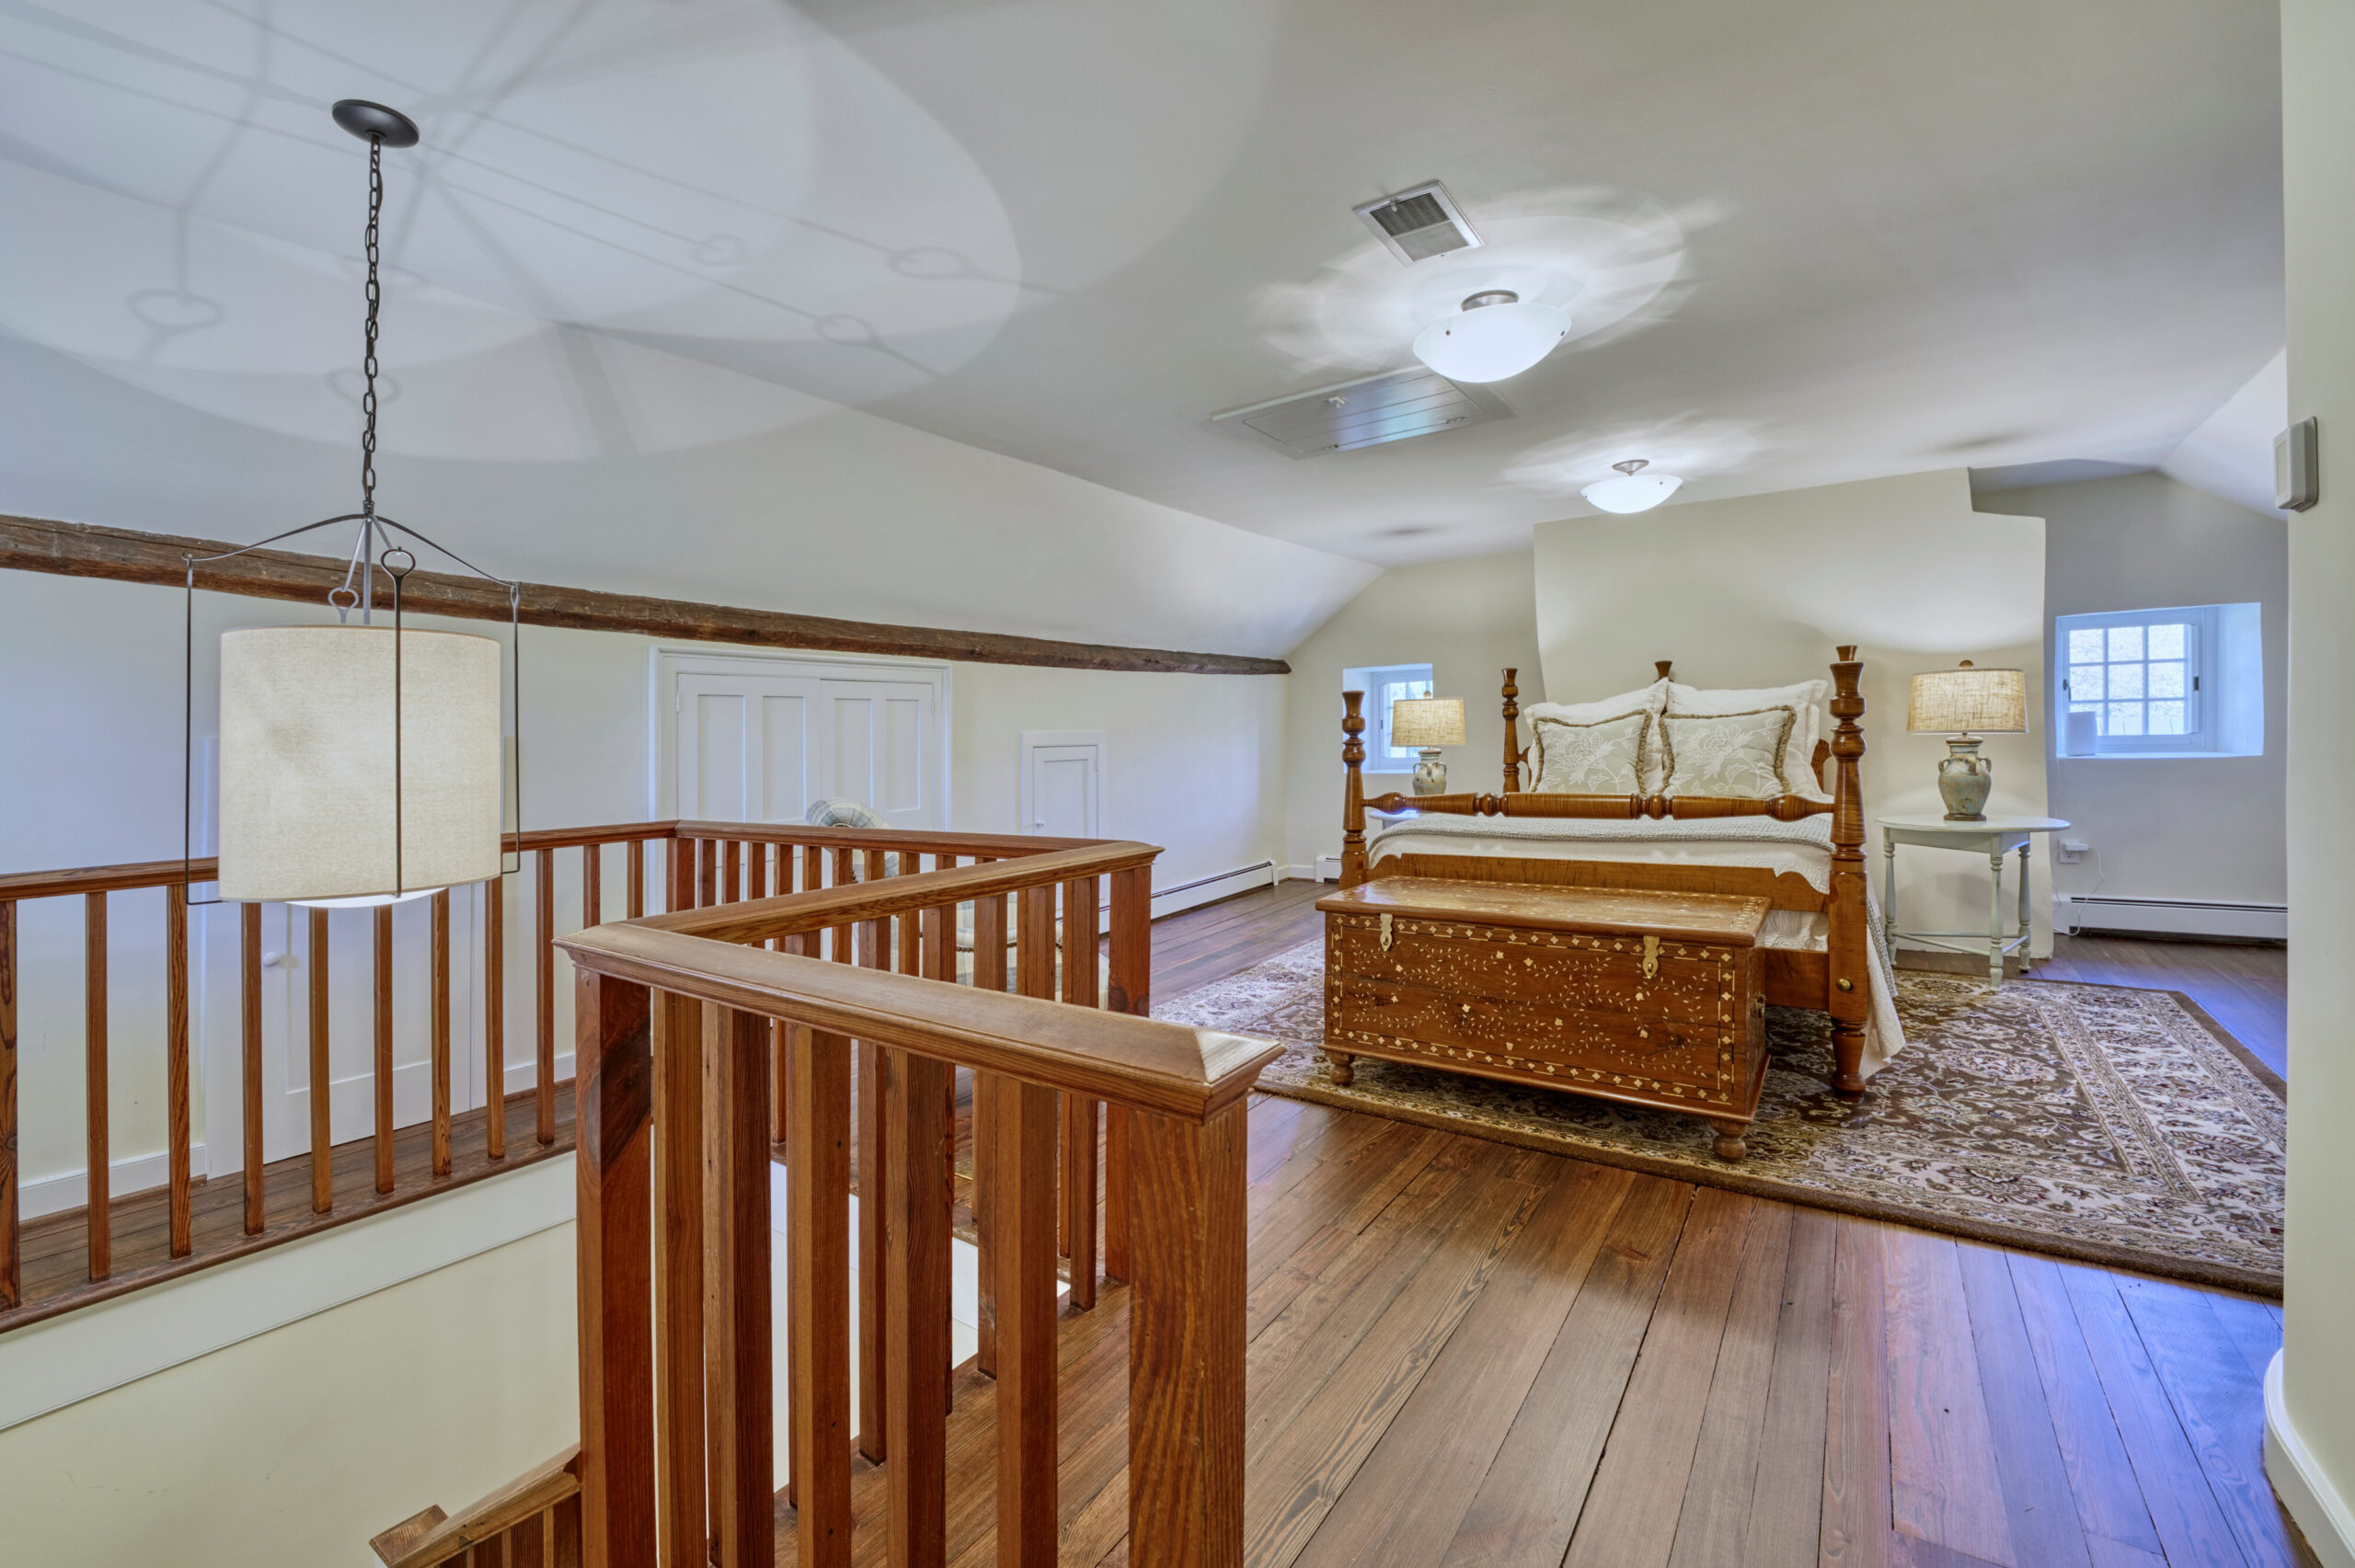 Professional interior photo of main house of Historic Hearthstone Manor: 35428 Appalachian Trail Rd, Round Hill, Virginia - showing loft bedroom with hardwood floors and 4-poster bed